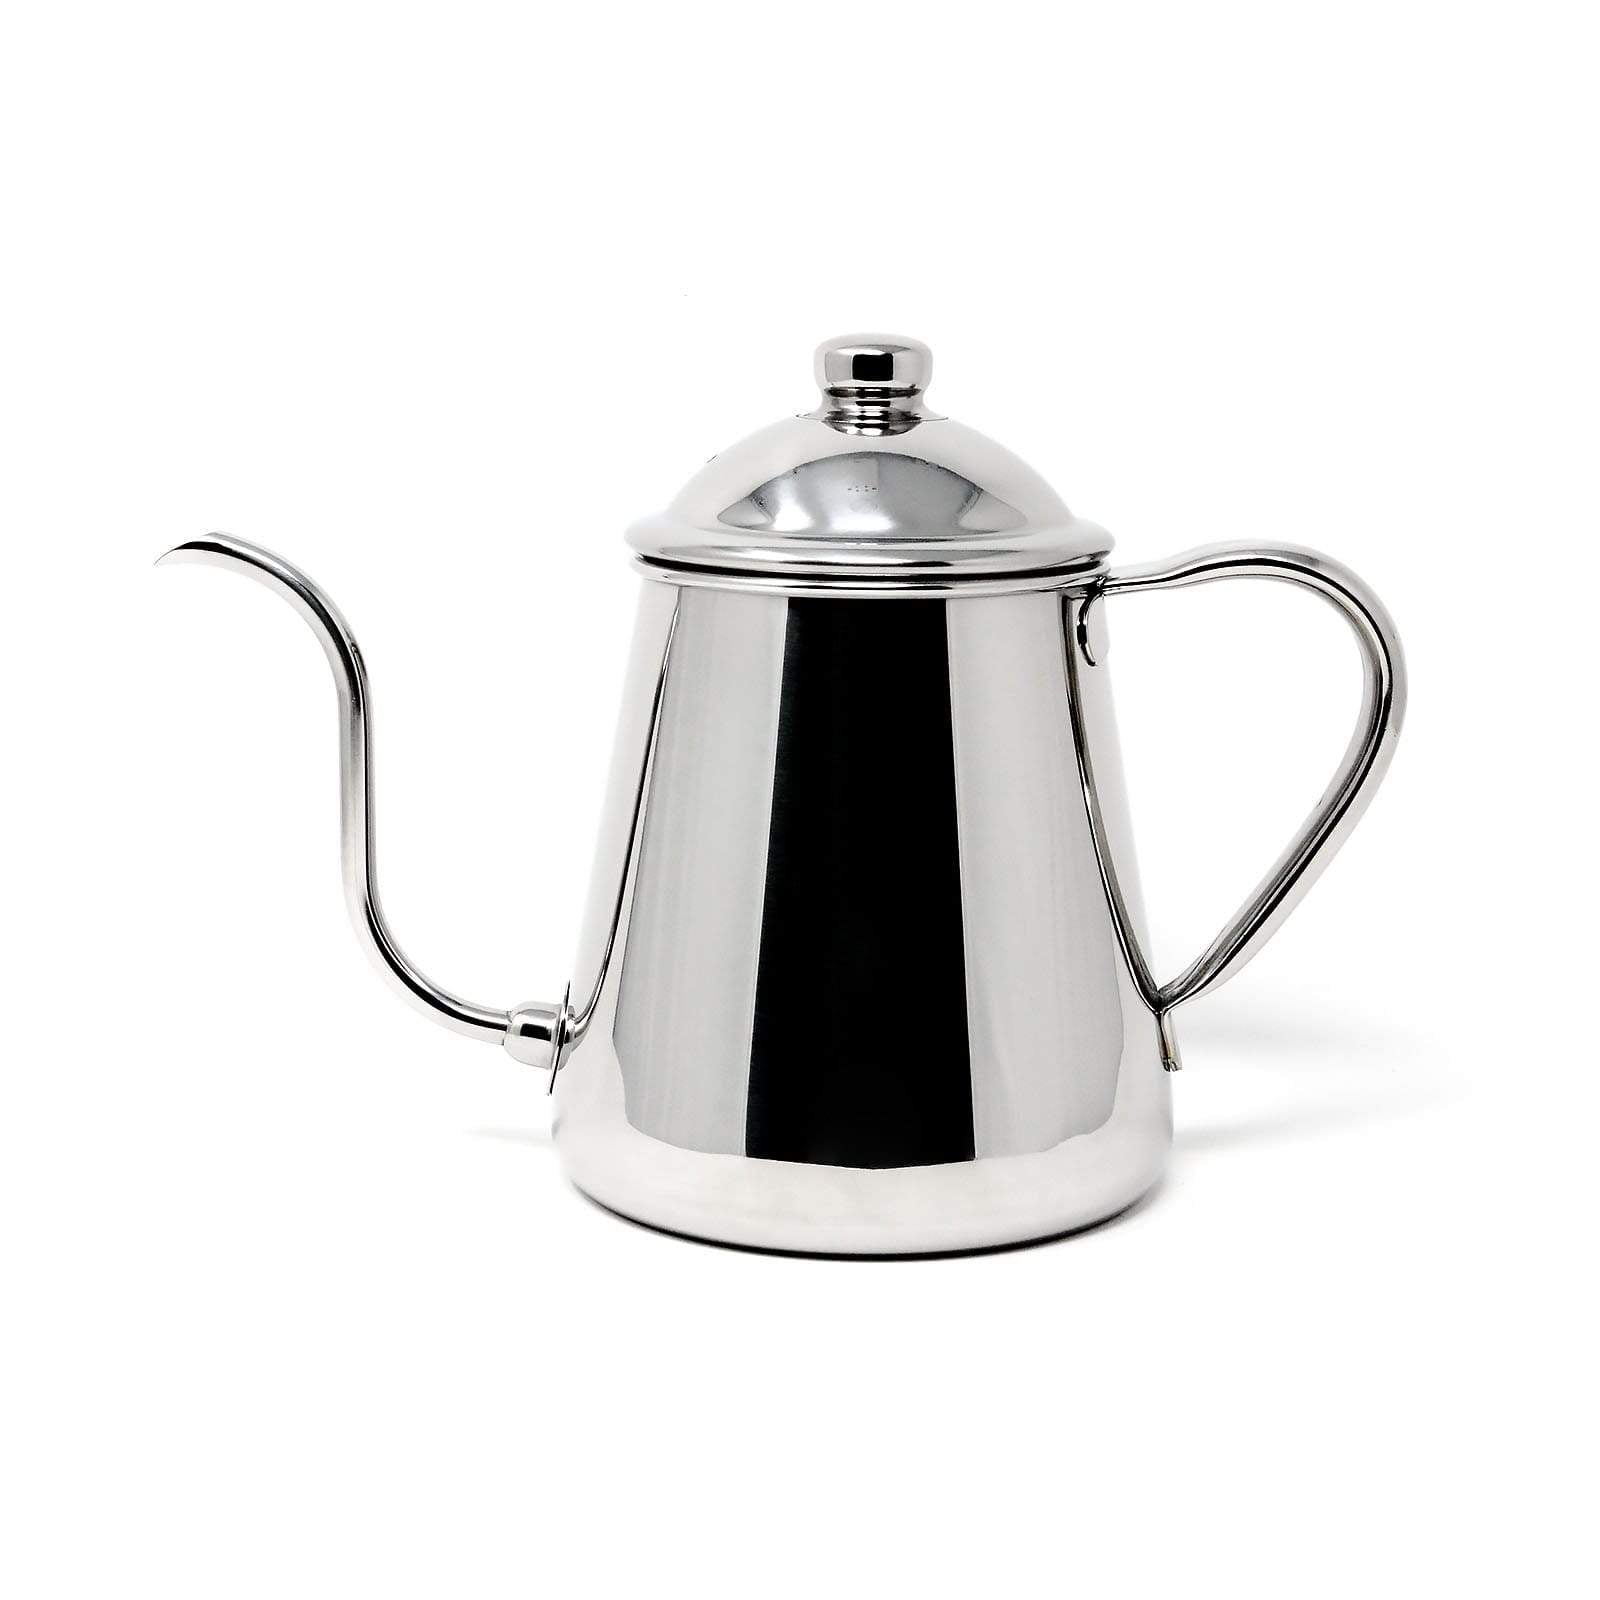 https://cdn.shopify.com/s/files/1/1610/3863/products/takahiro-shizuku-pour-over-brewing-induction-kettle-0-9l-pour-over-kettles-6982096224339_1600x.jpg?v=1564114619